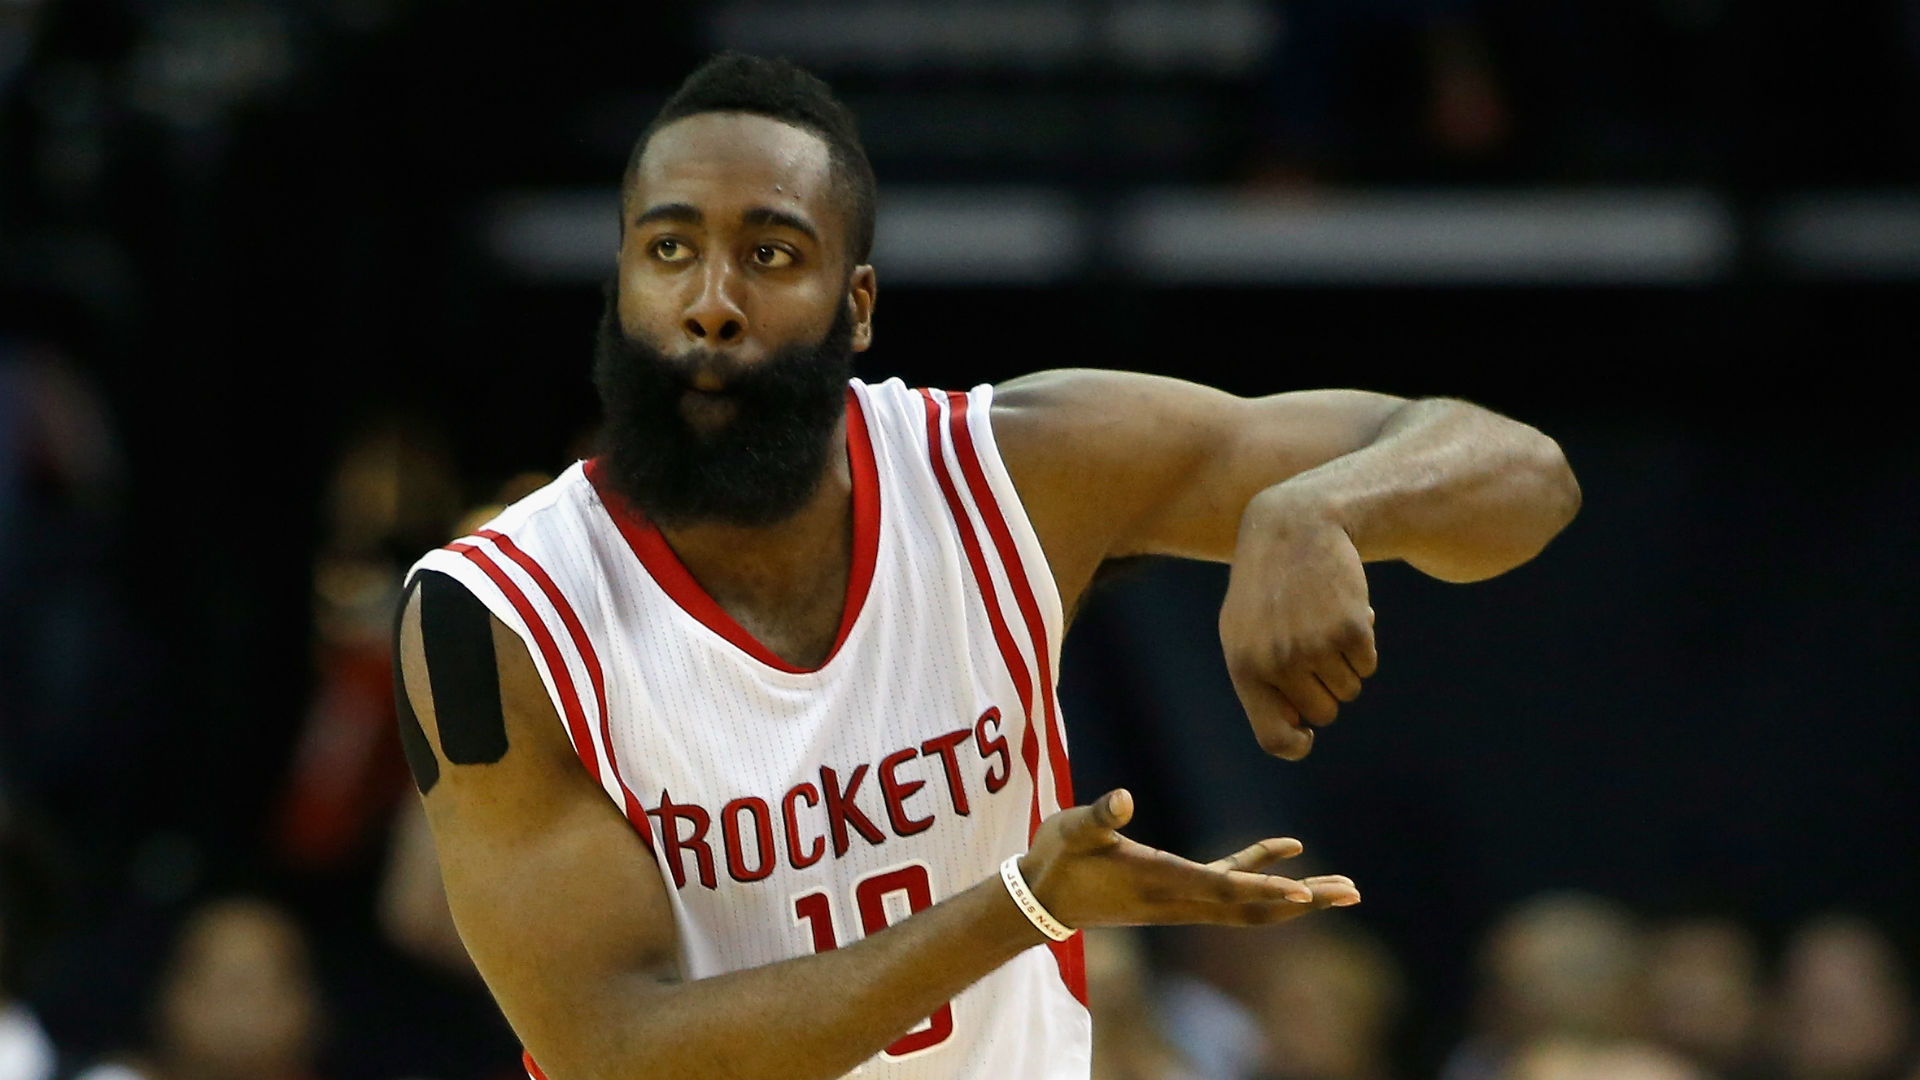 James Harden's Lil B Curse Response: 'I Don't Know Who That Is